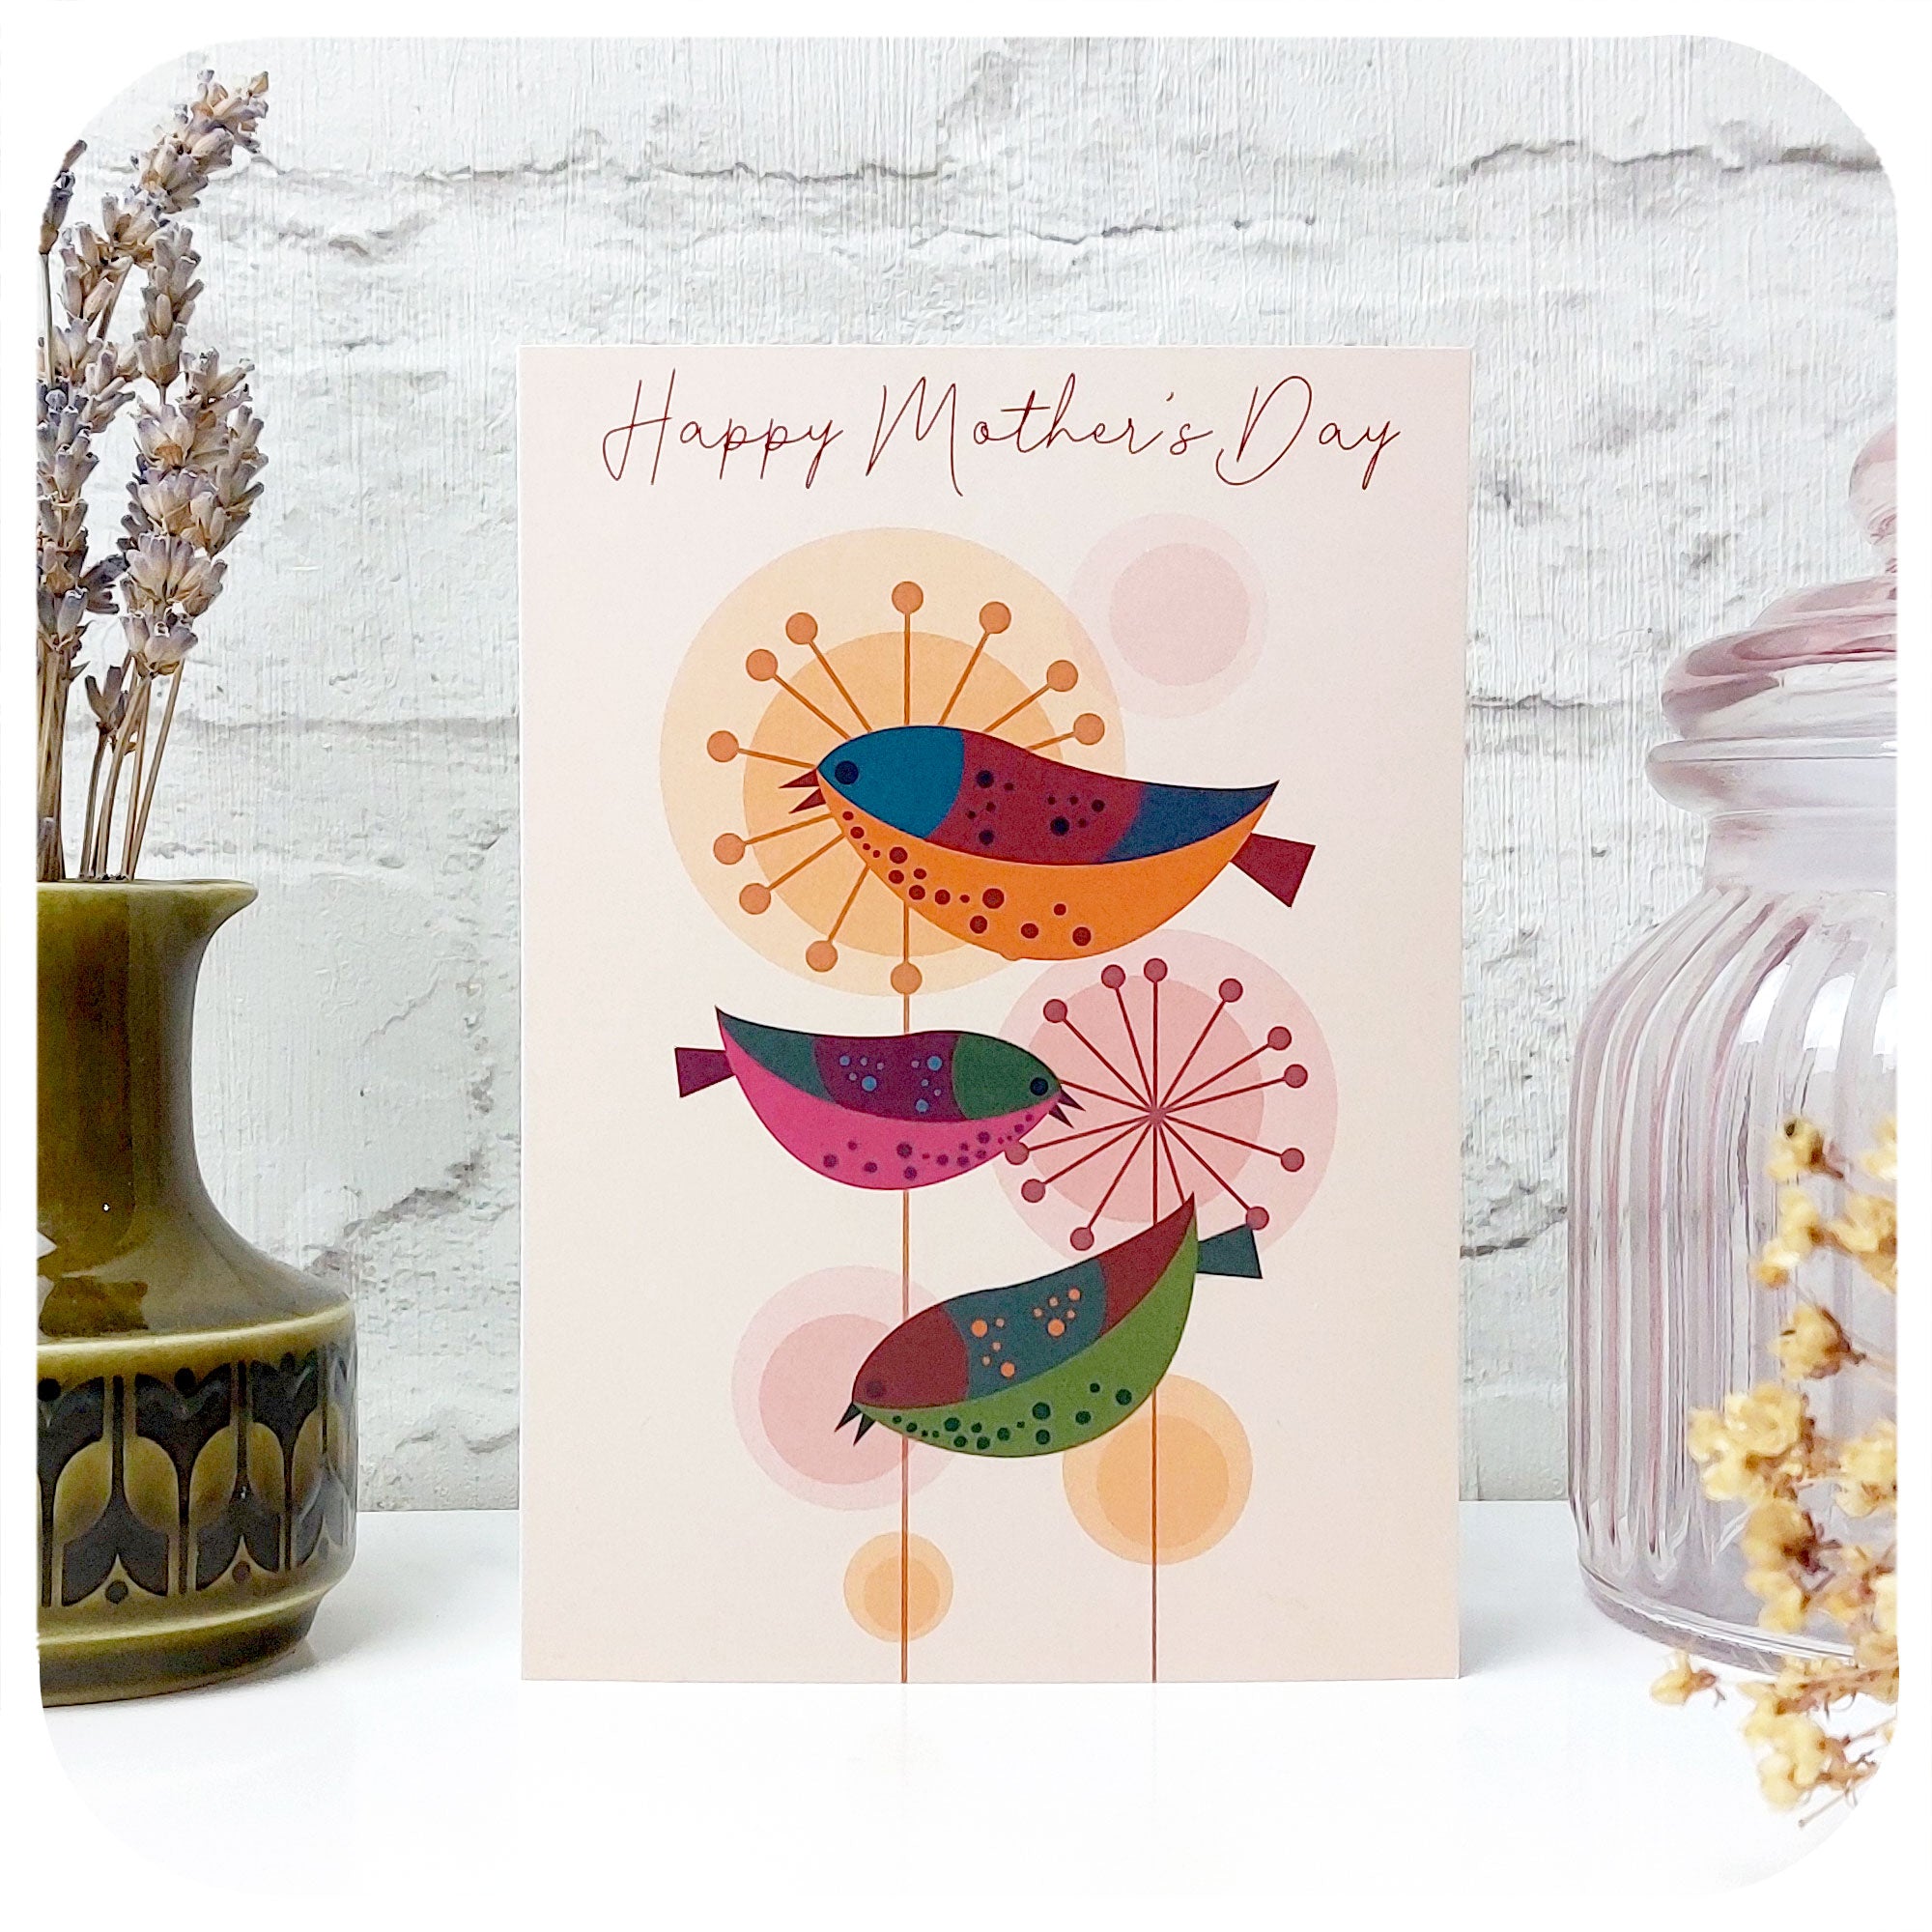 Happy Mother's Day Card featuring three retro birds on alliums standing with a vintage Hornsea jug and jar | The Inkabilly Emporium